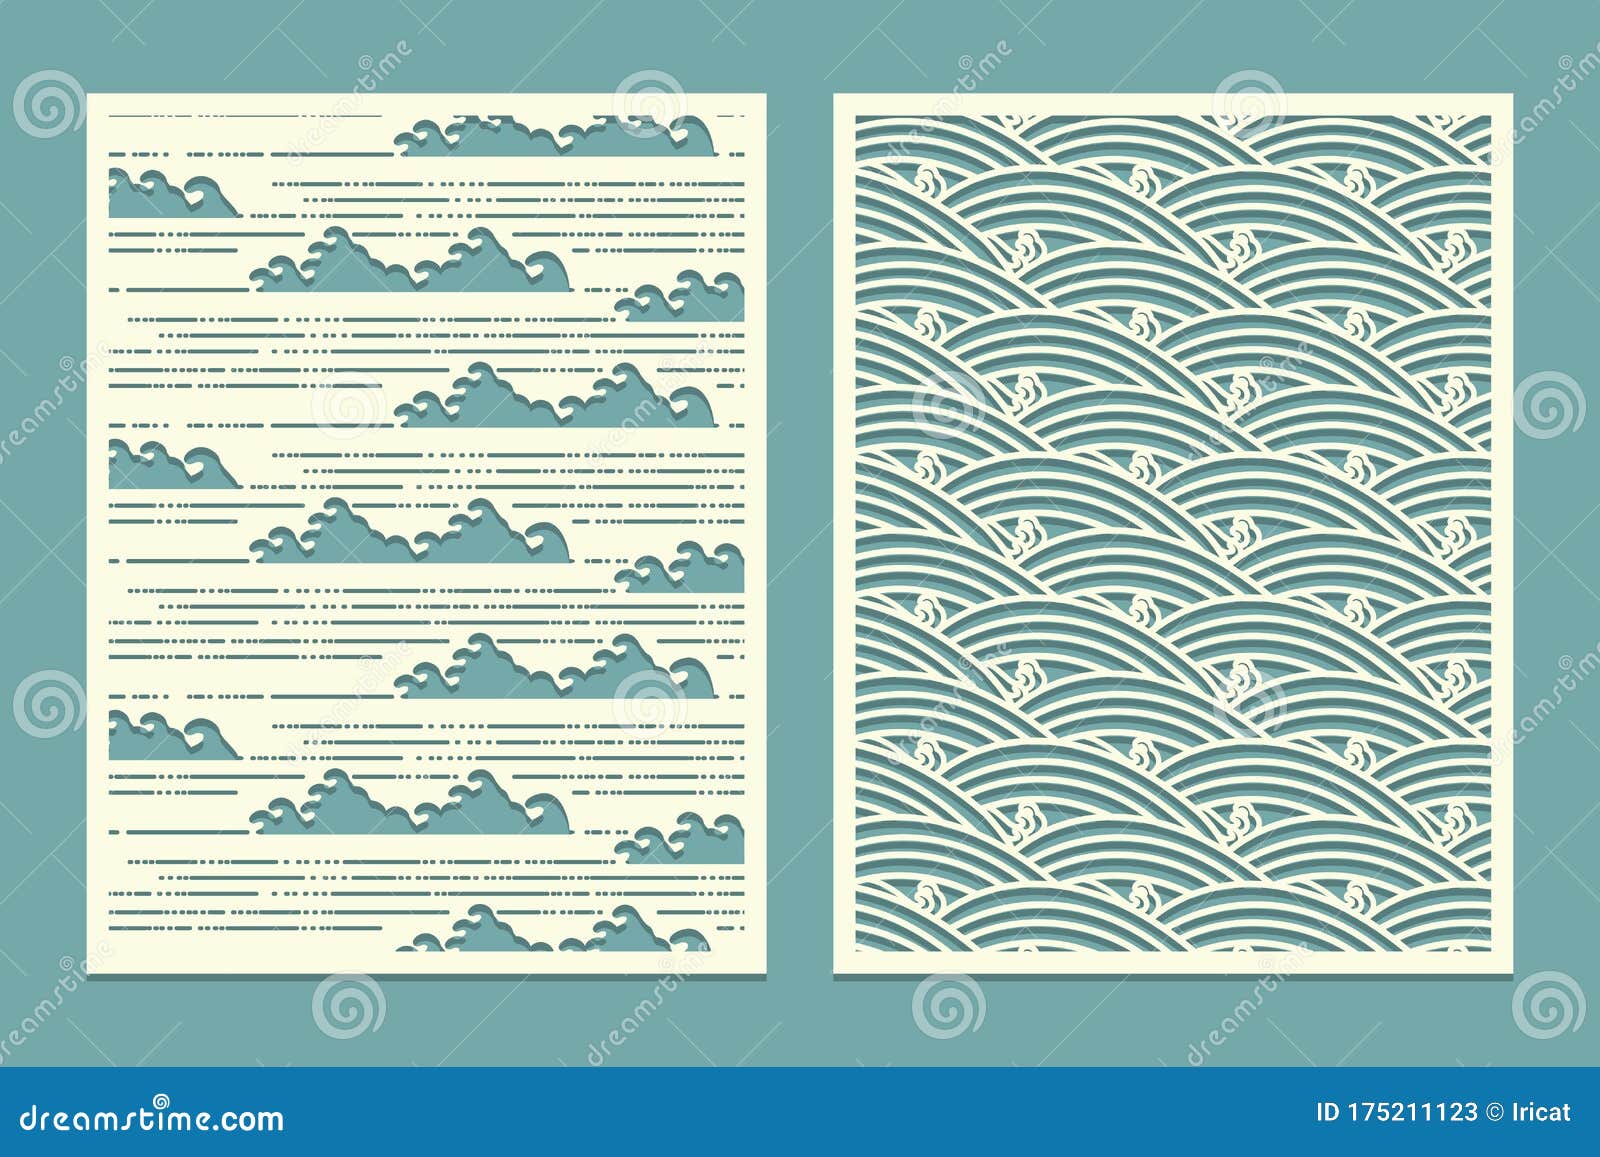 set template for cutting. patterns marine waves. oriental style scenery metal cutting or wood carving, panel , stencil for